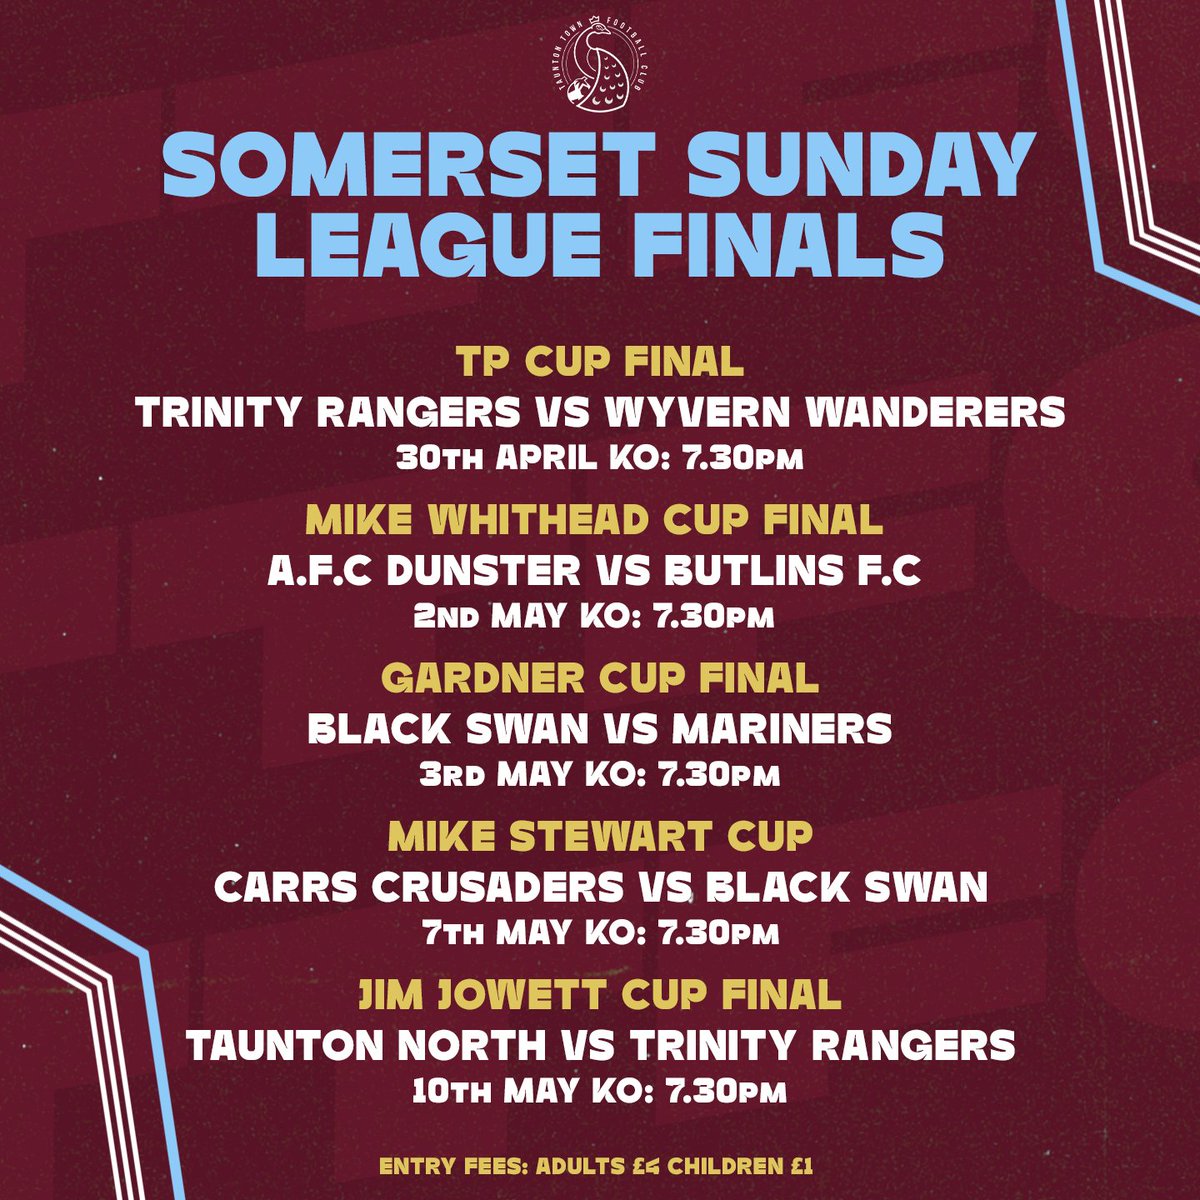 Wordsworth Drive will play host to the Somerset Sunday League Cup Finals over the coming month. More details below 👇 #UpThePeacocks 🦚